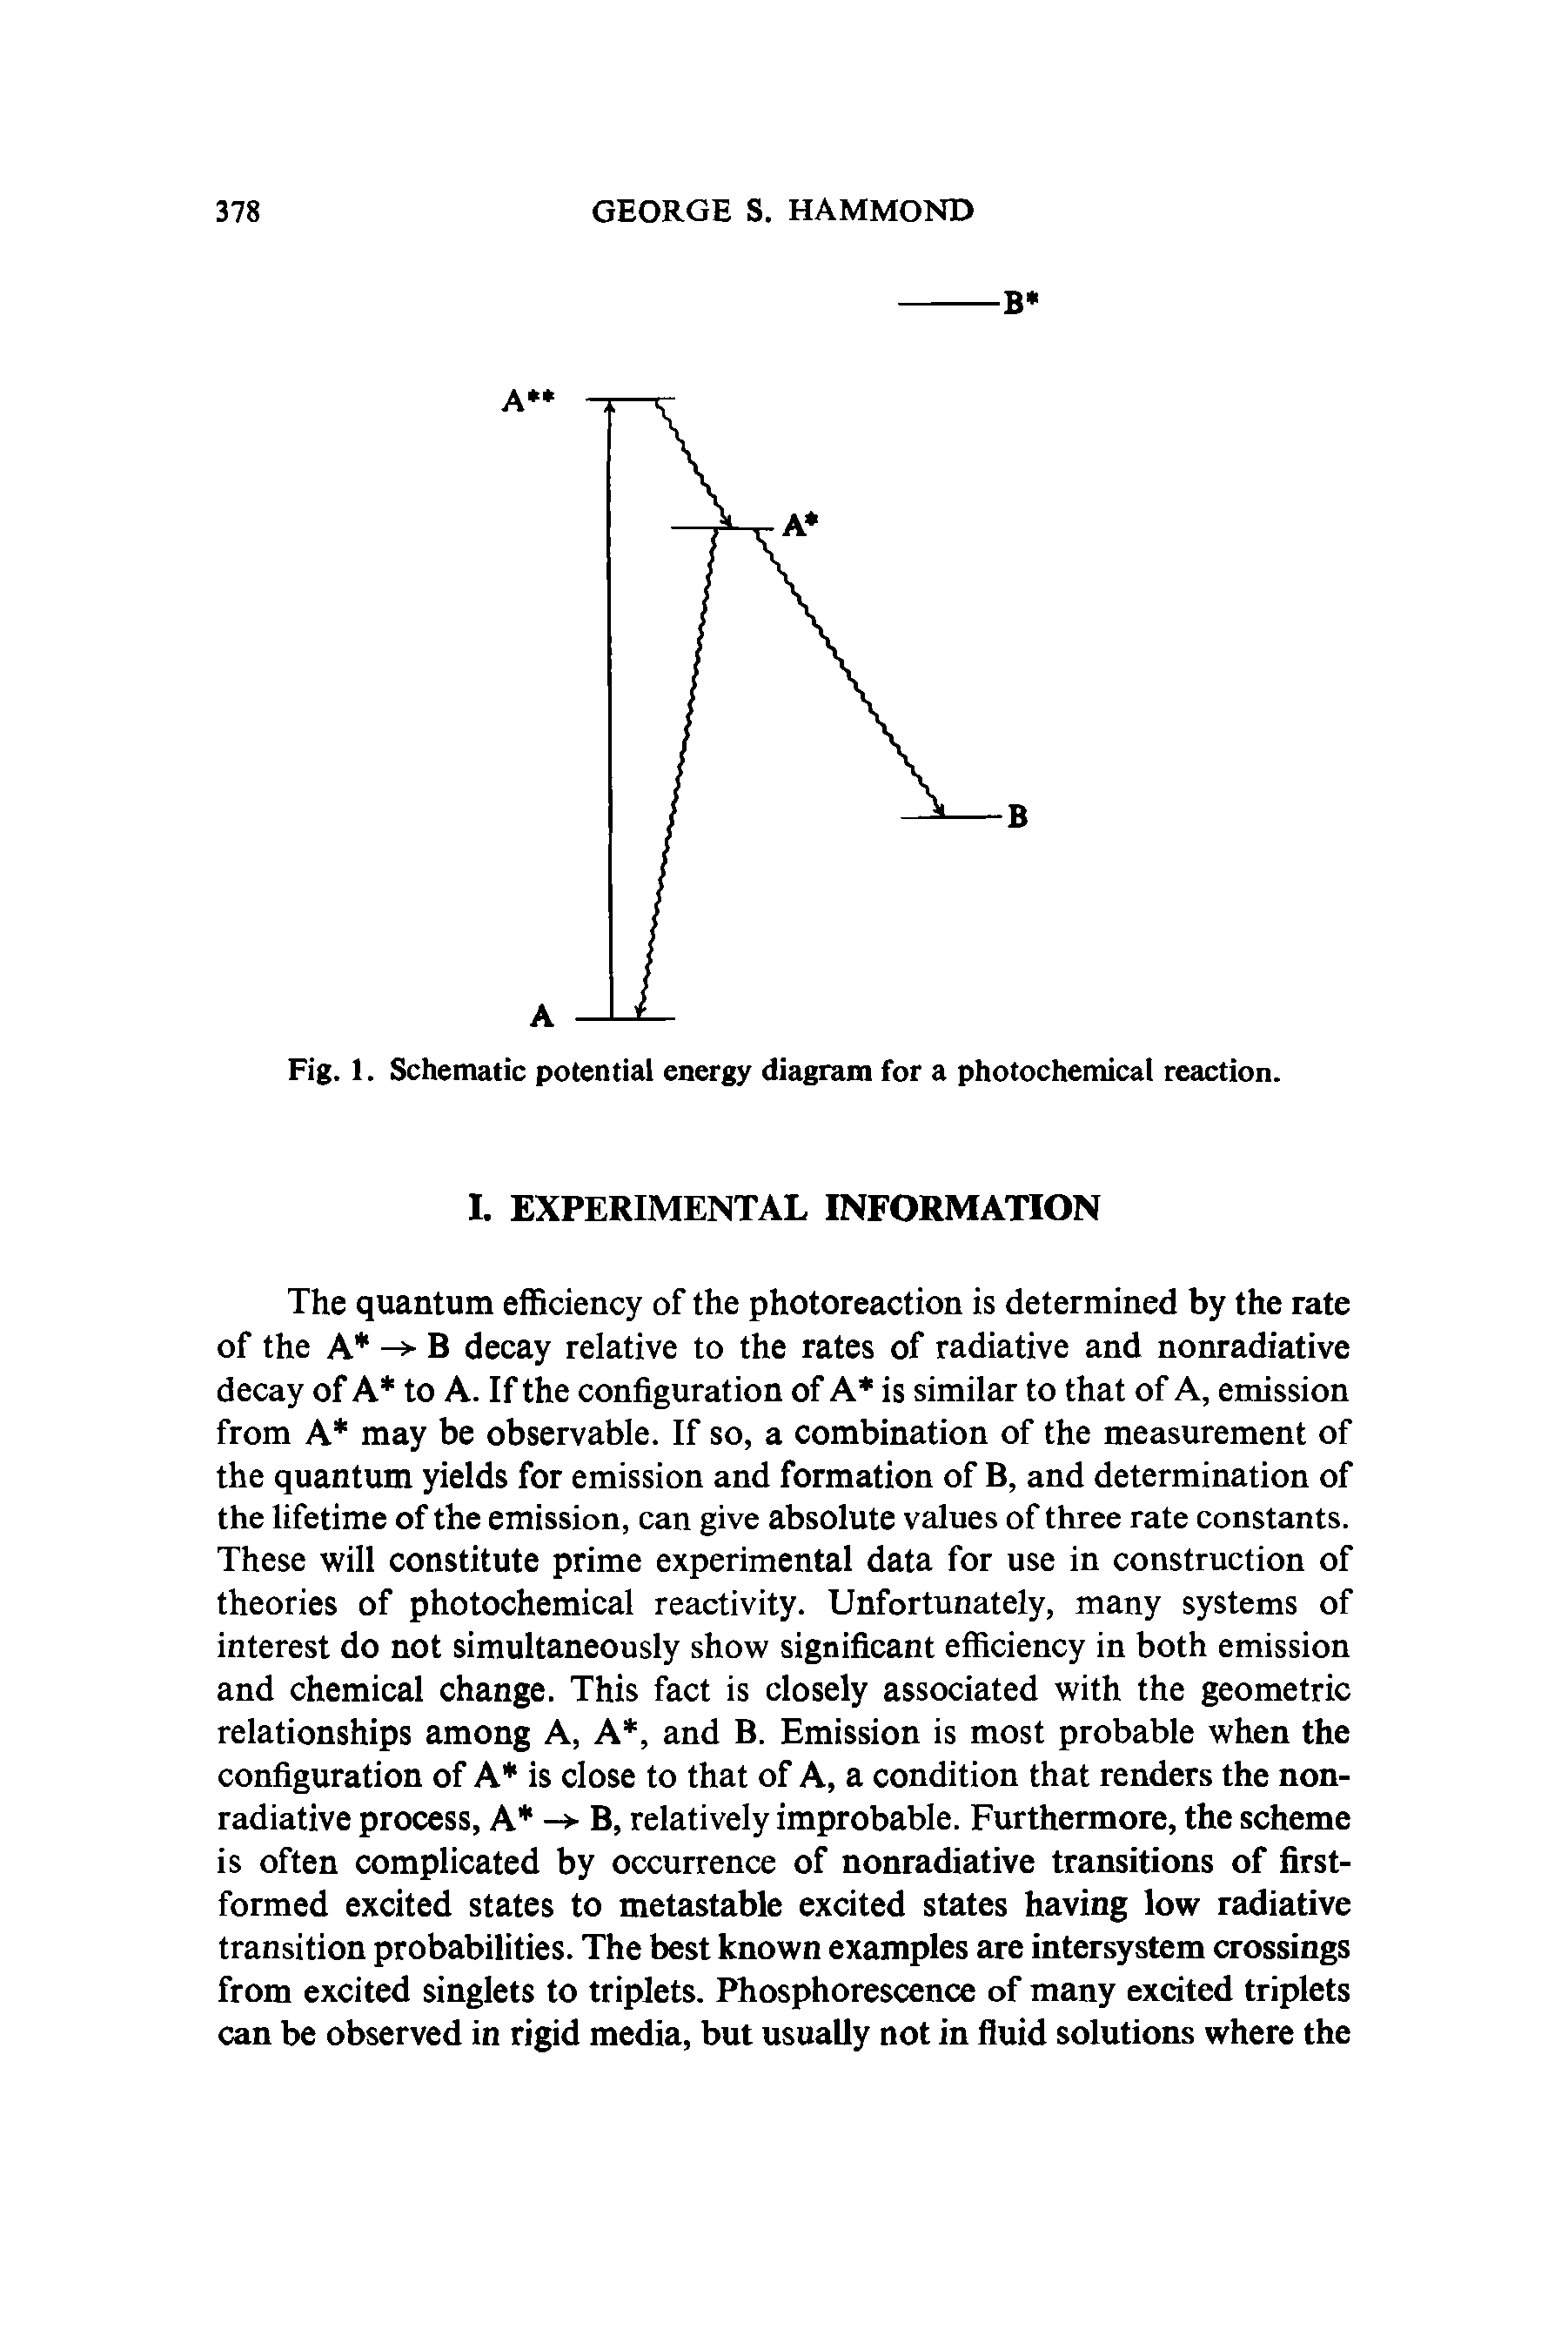 Fig. 1. Schematic potential energy diagram for a photochemical reaction.